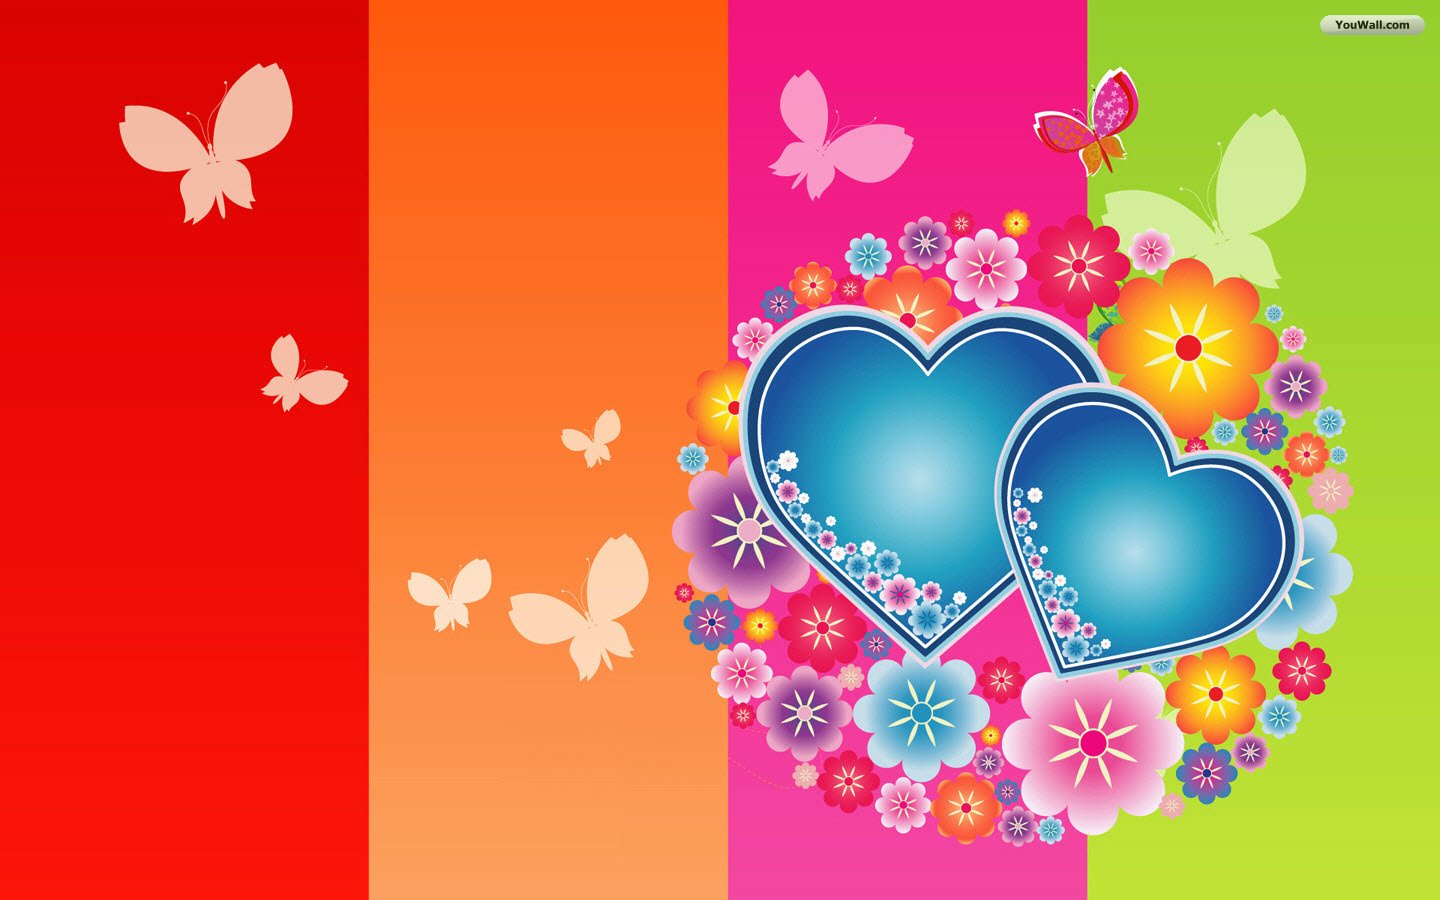 Download 66+ Hearts And Flowers Wallpaper on WallpaperSafari